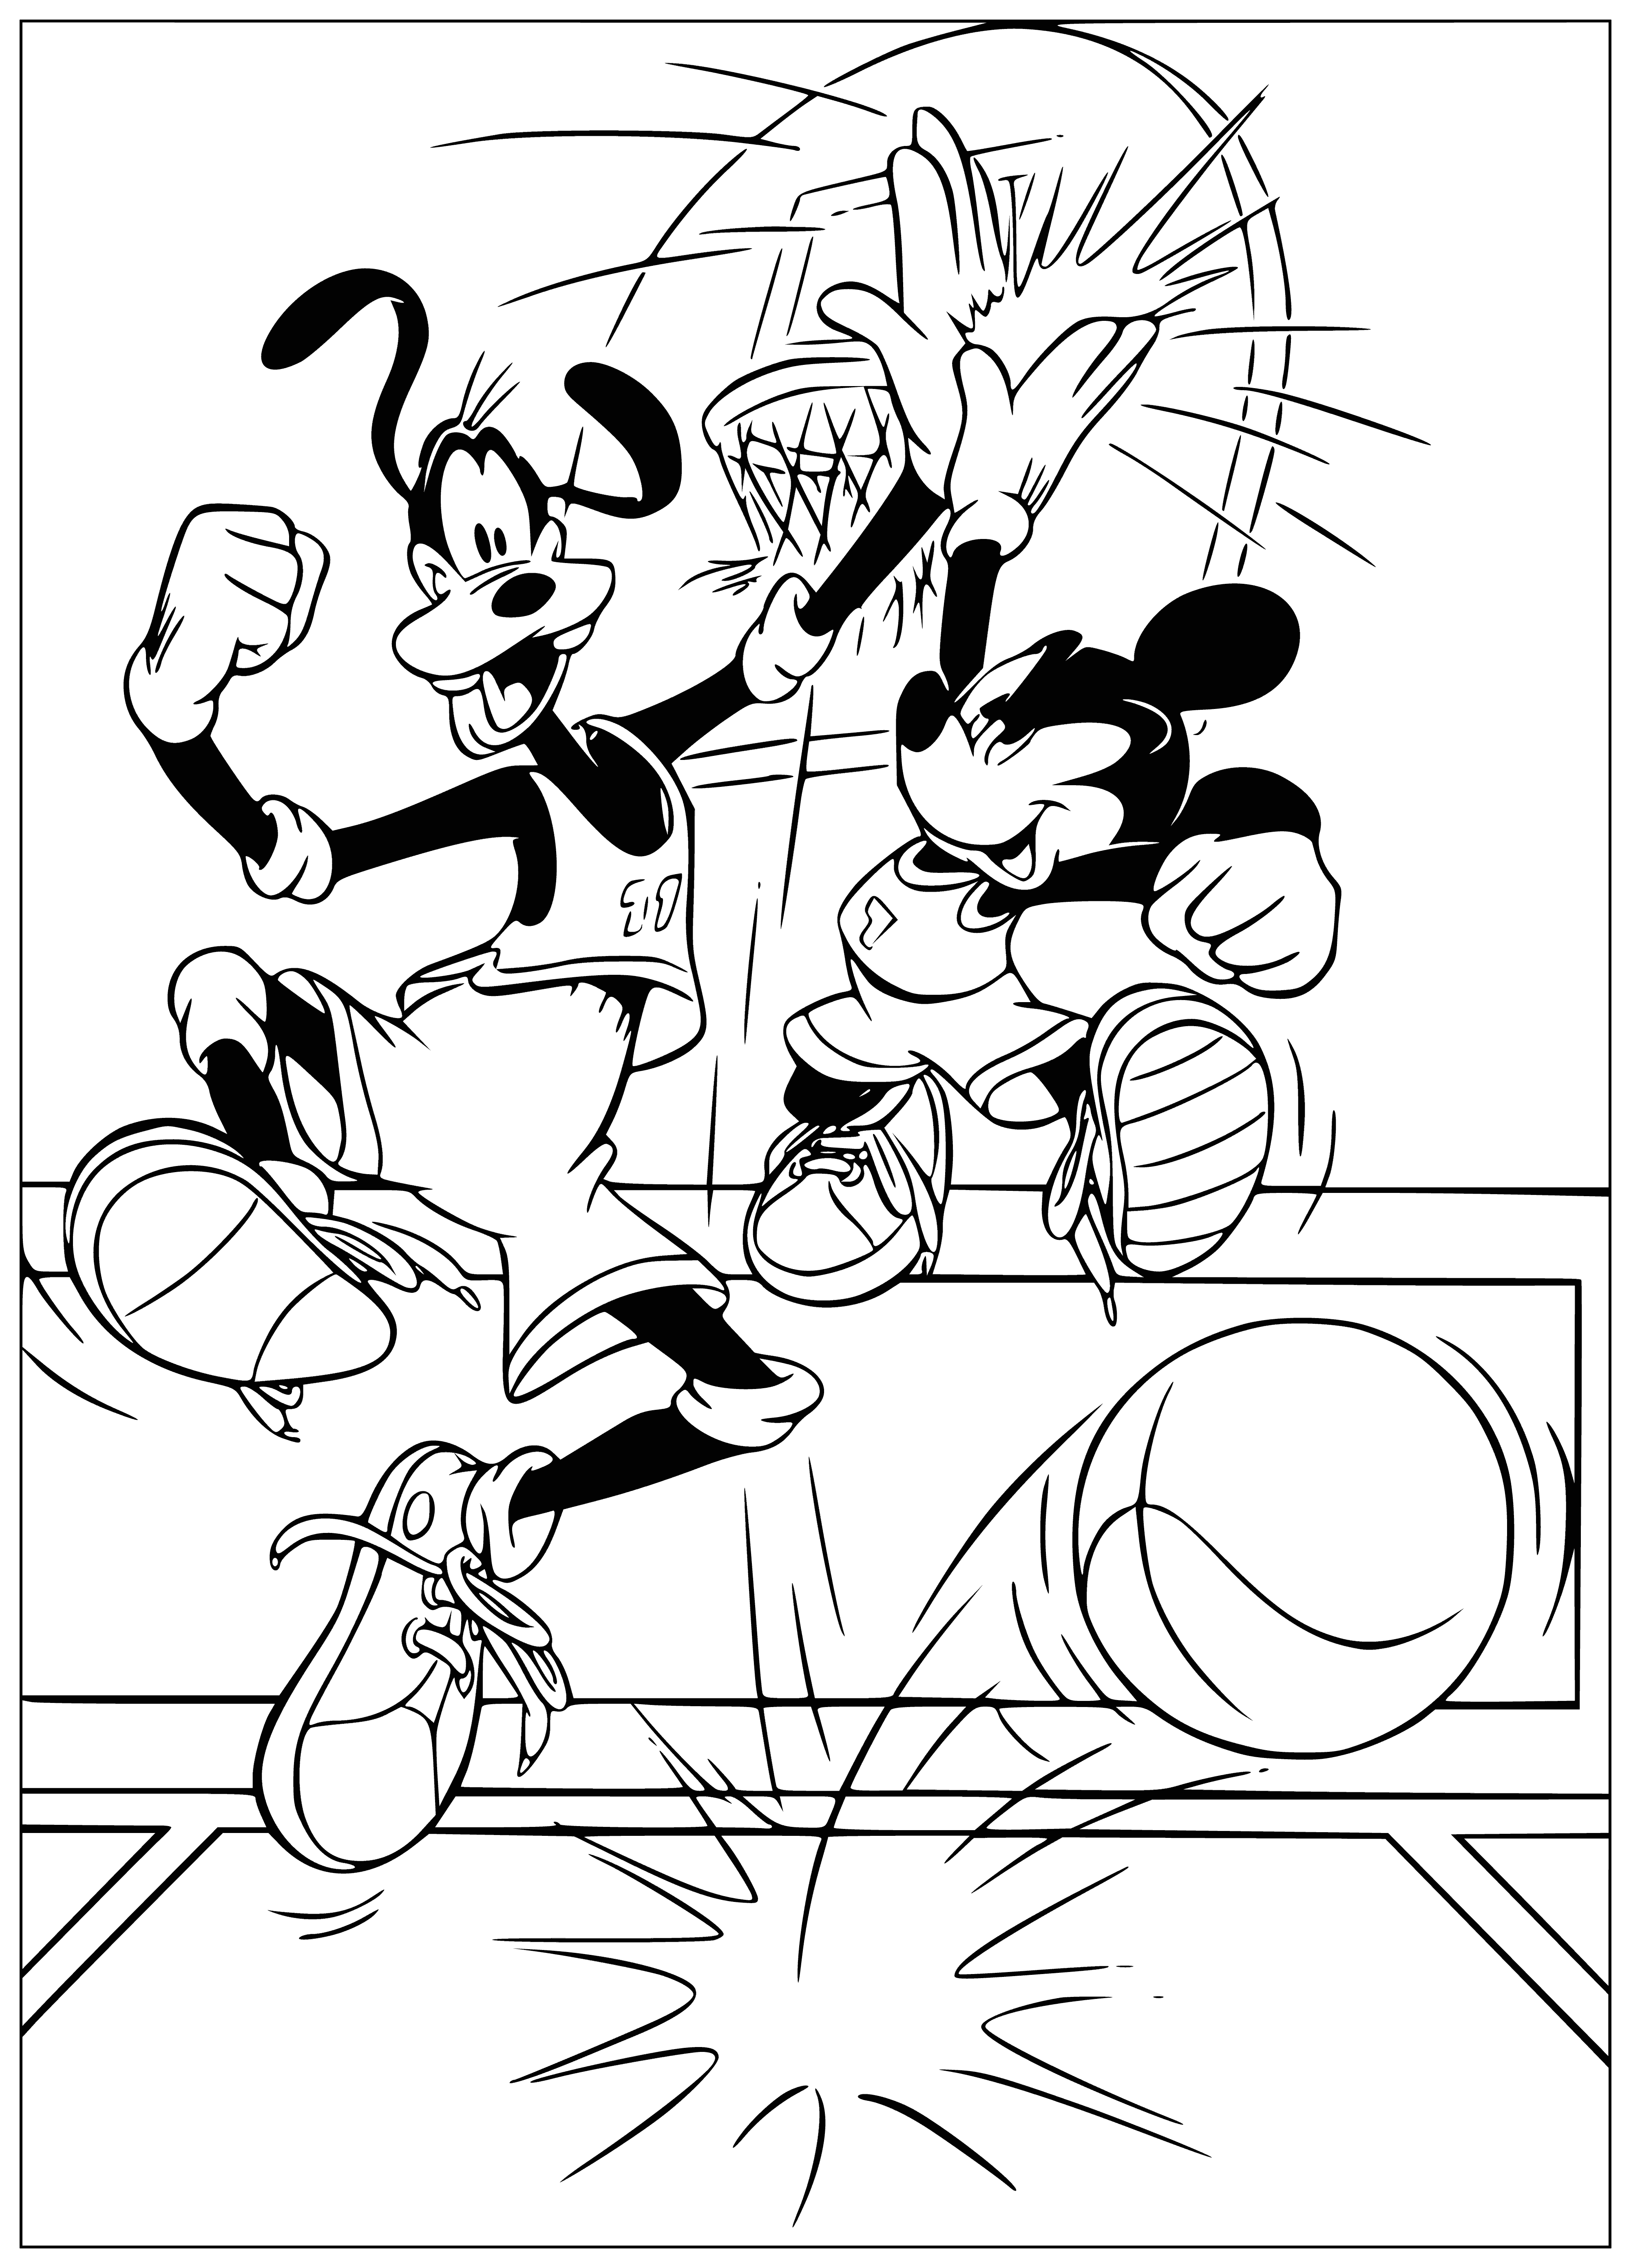 coloring page: Mickey and Goofy stand side by side, wearing shoes & socks, looking happy with a solid color background.